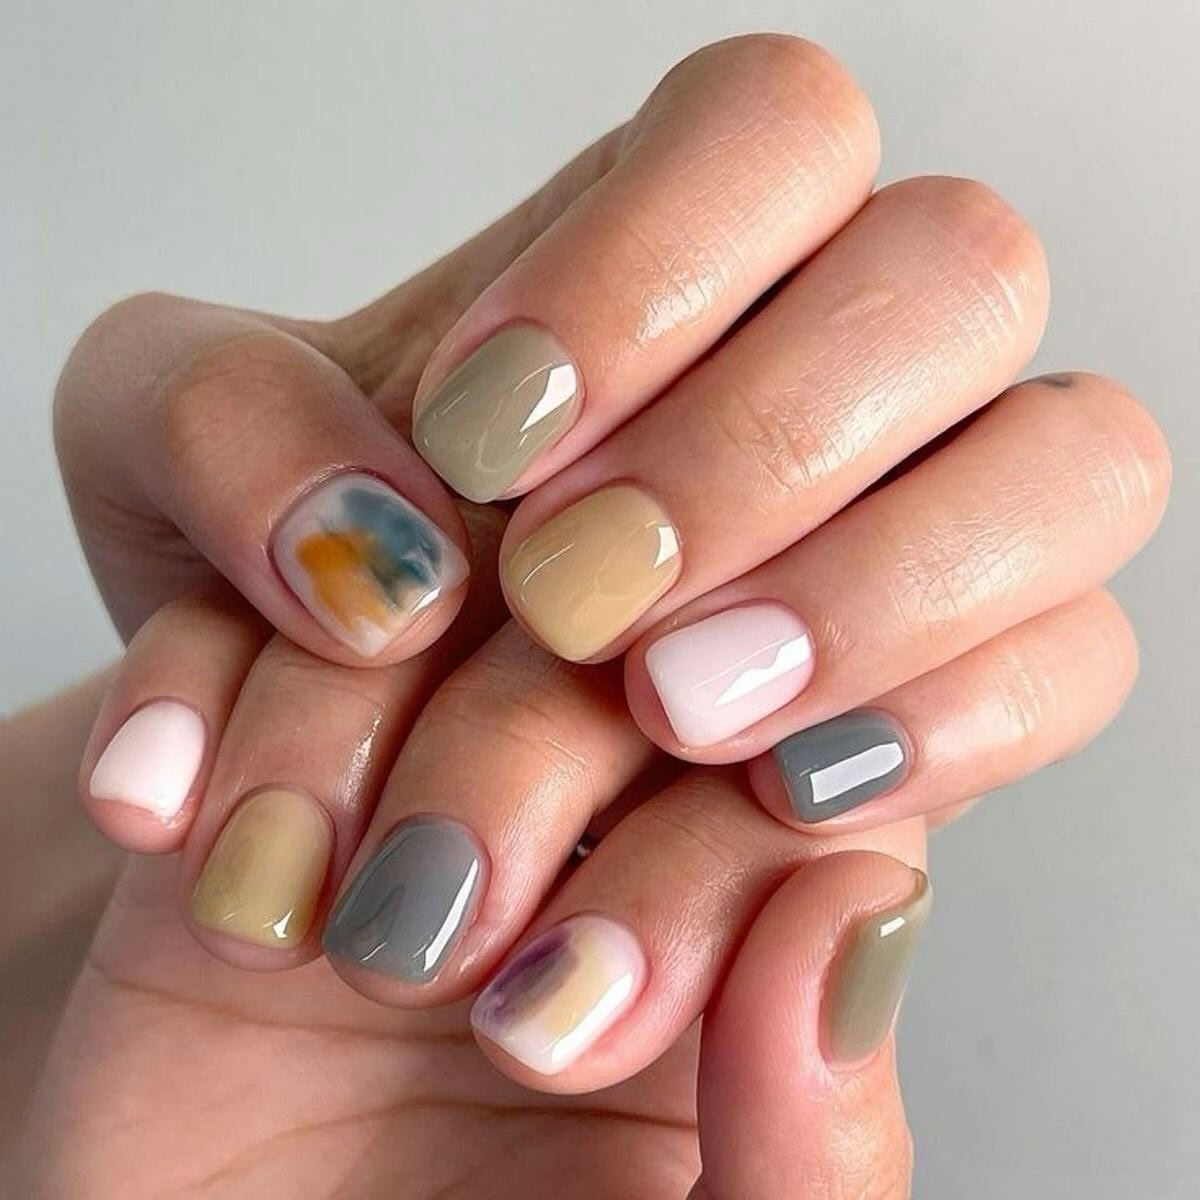 Manicures that are cute but evoke a sense of zen? Say less 😎

#manicure #nails #nailart #pedicure #nailsofinstagram #beauty #gelnails #nail #instanails #nailsart #nailstagram #nailpolish #gelpolish #naildesign #nailsoftheday #gel #nailstyle #nailsde